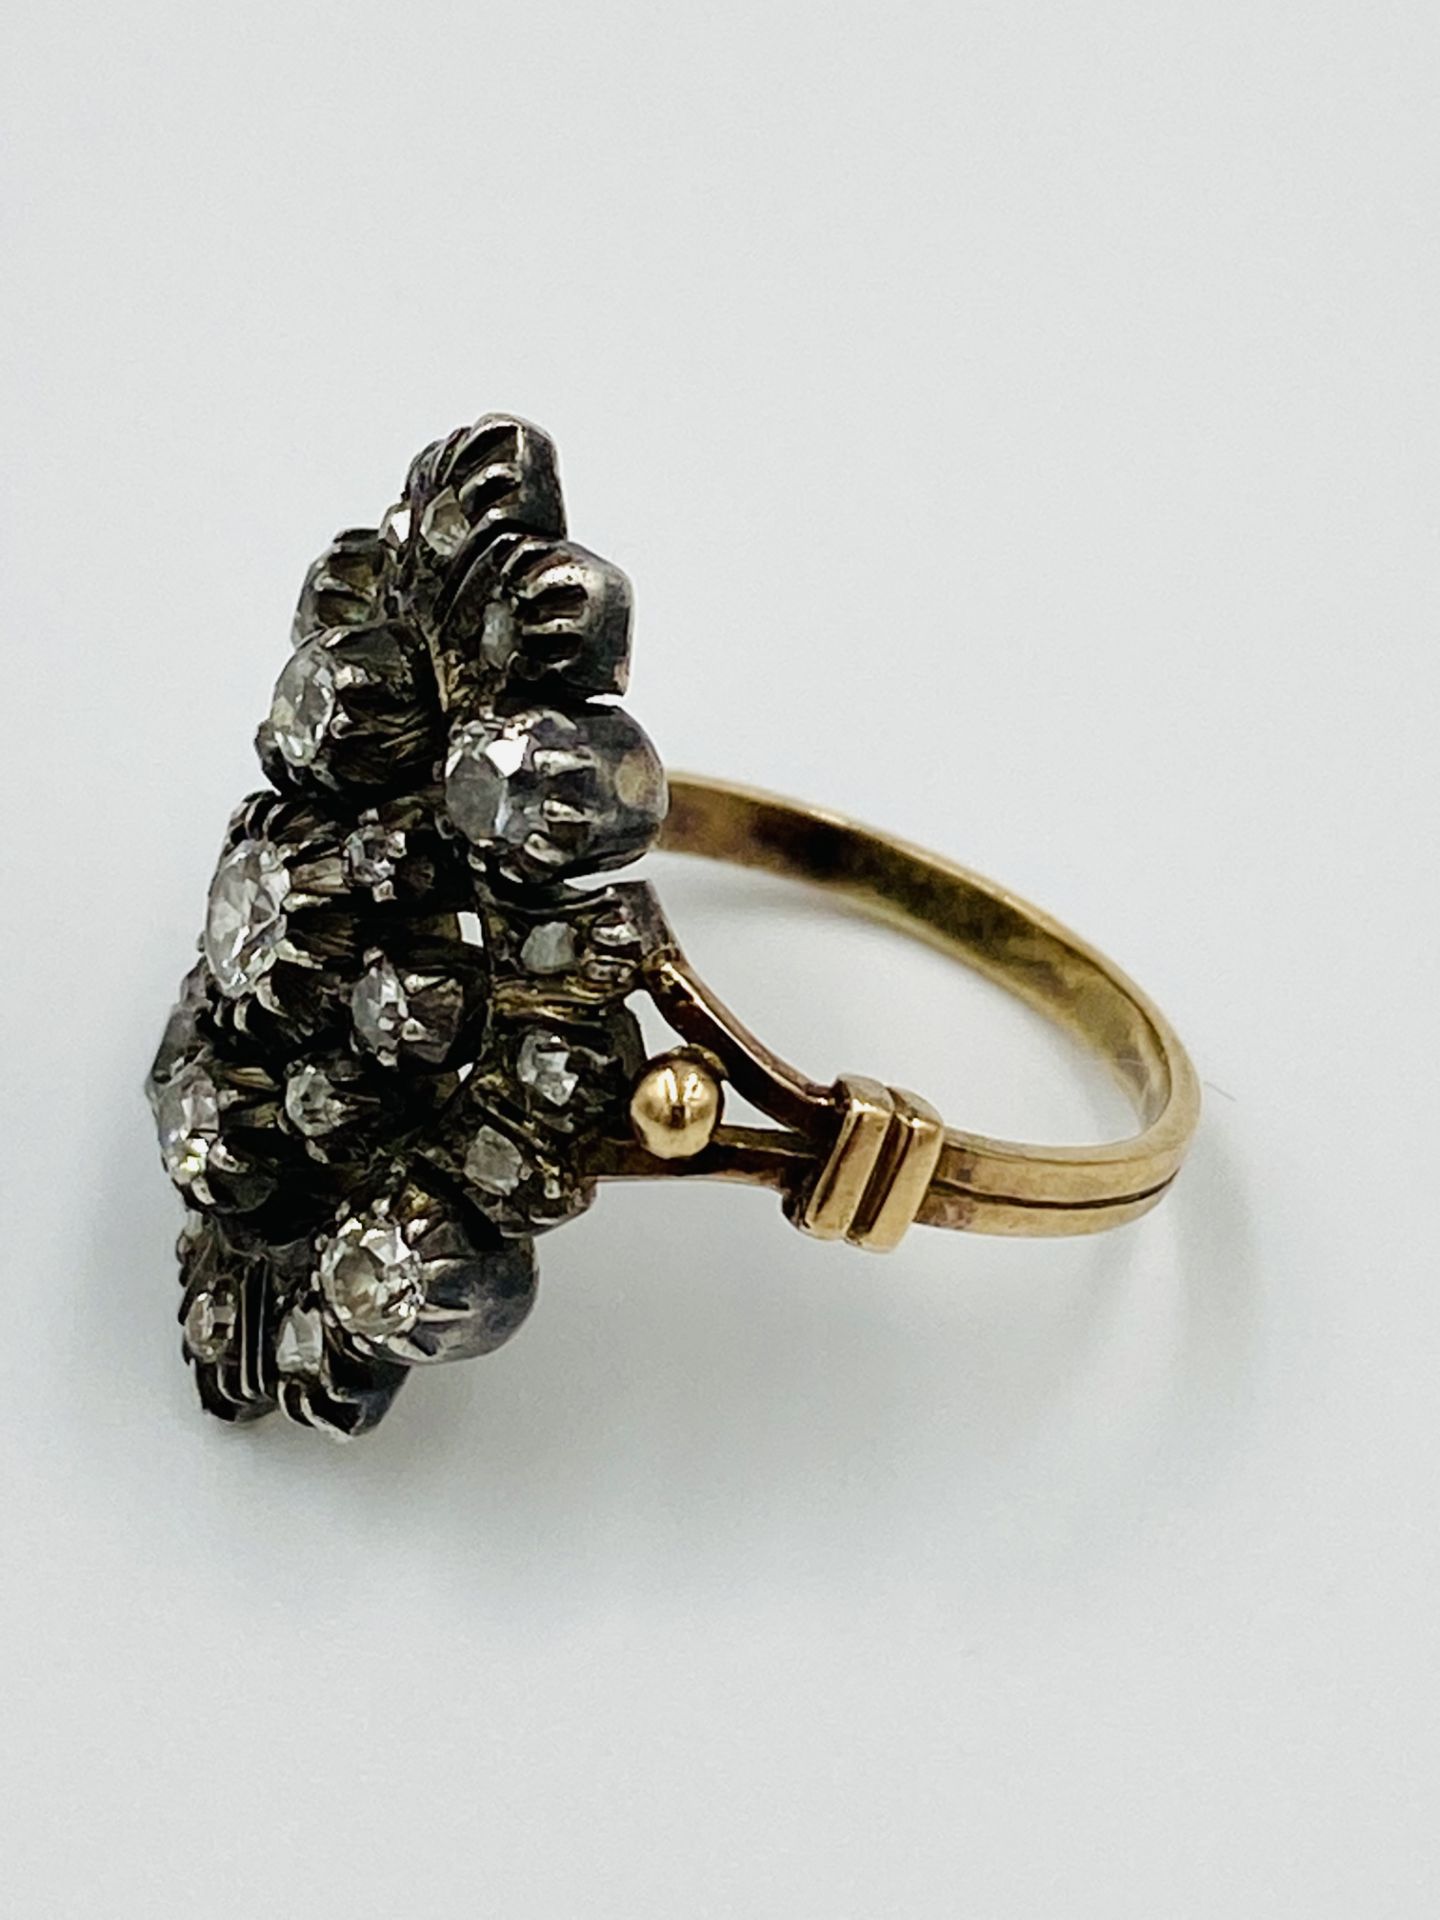 Antique gold and diamond ring - Image 2 of 5